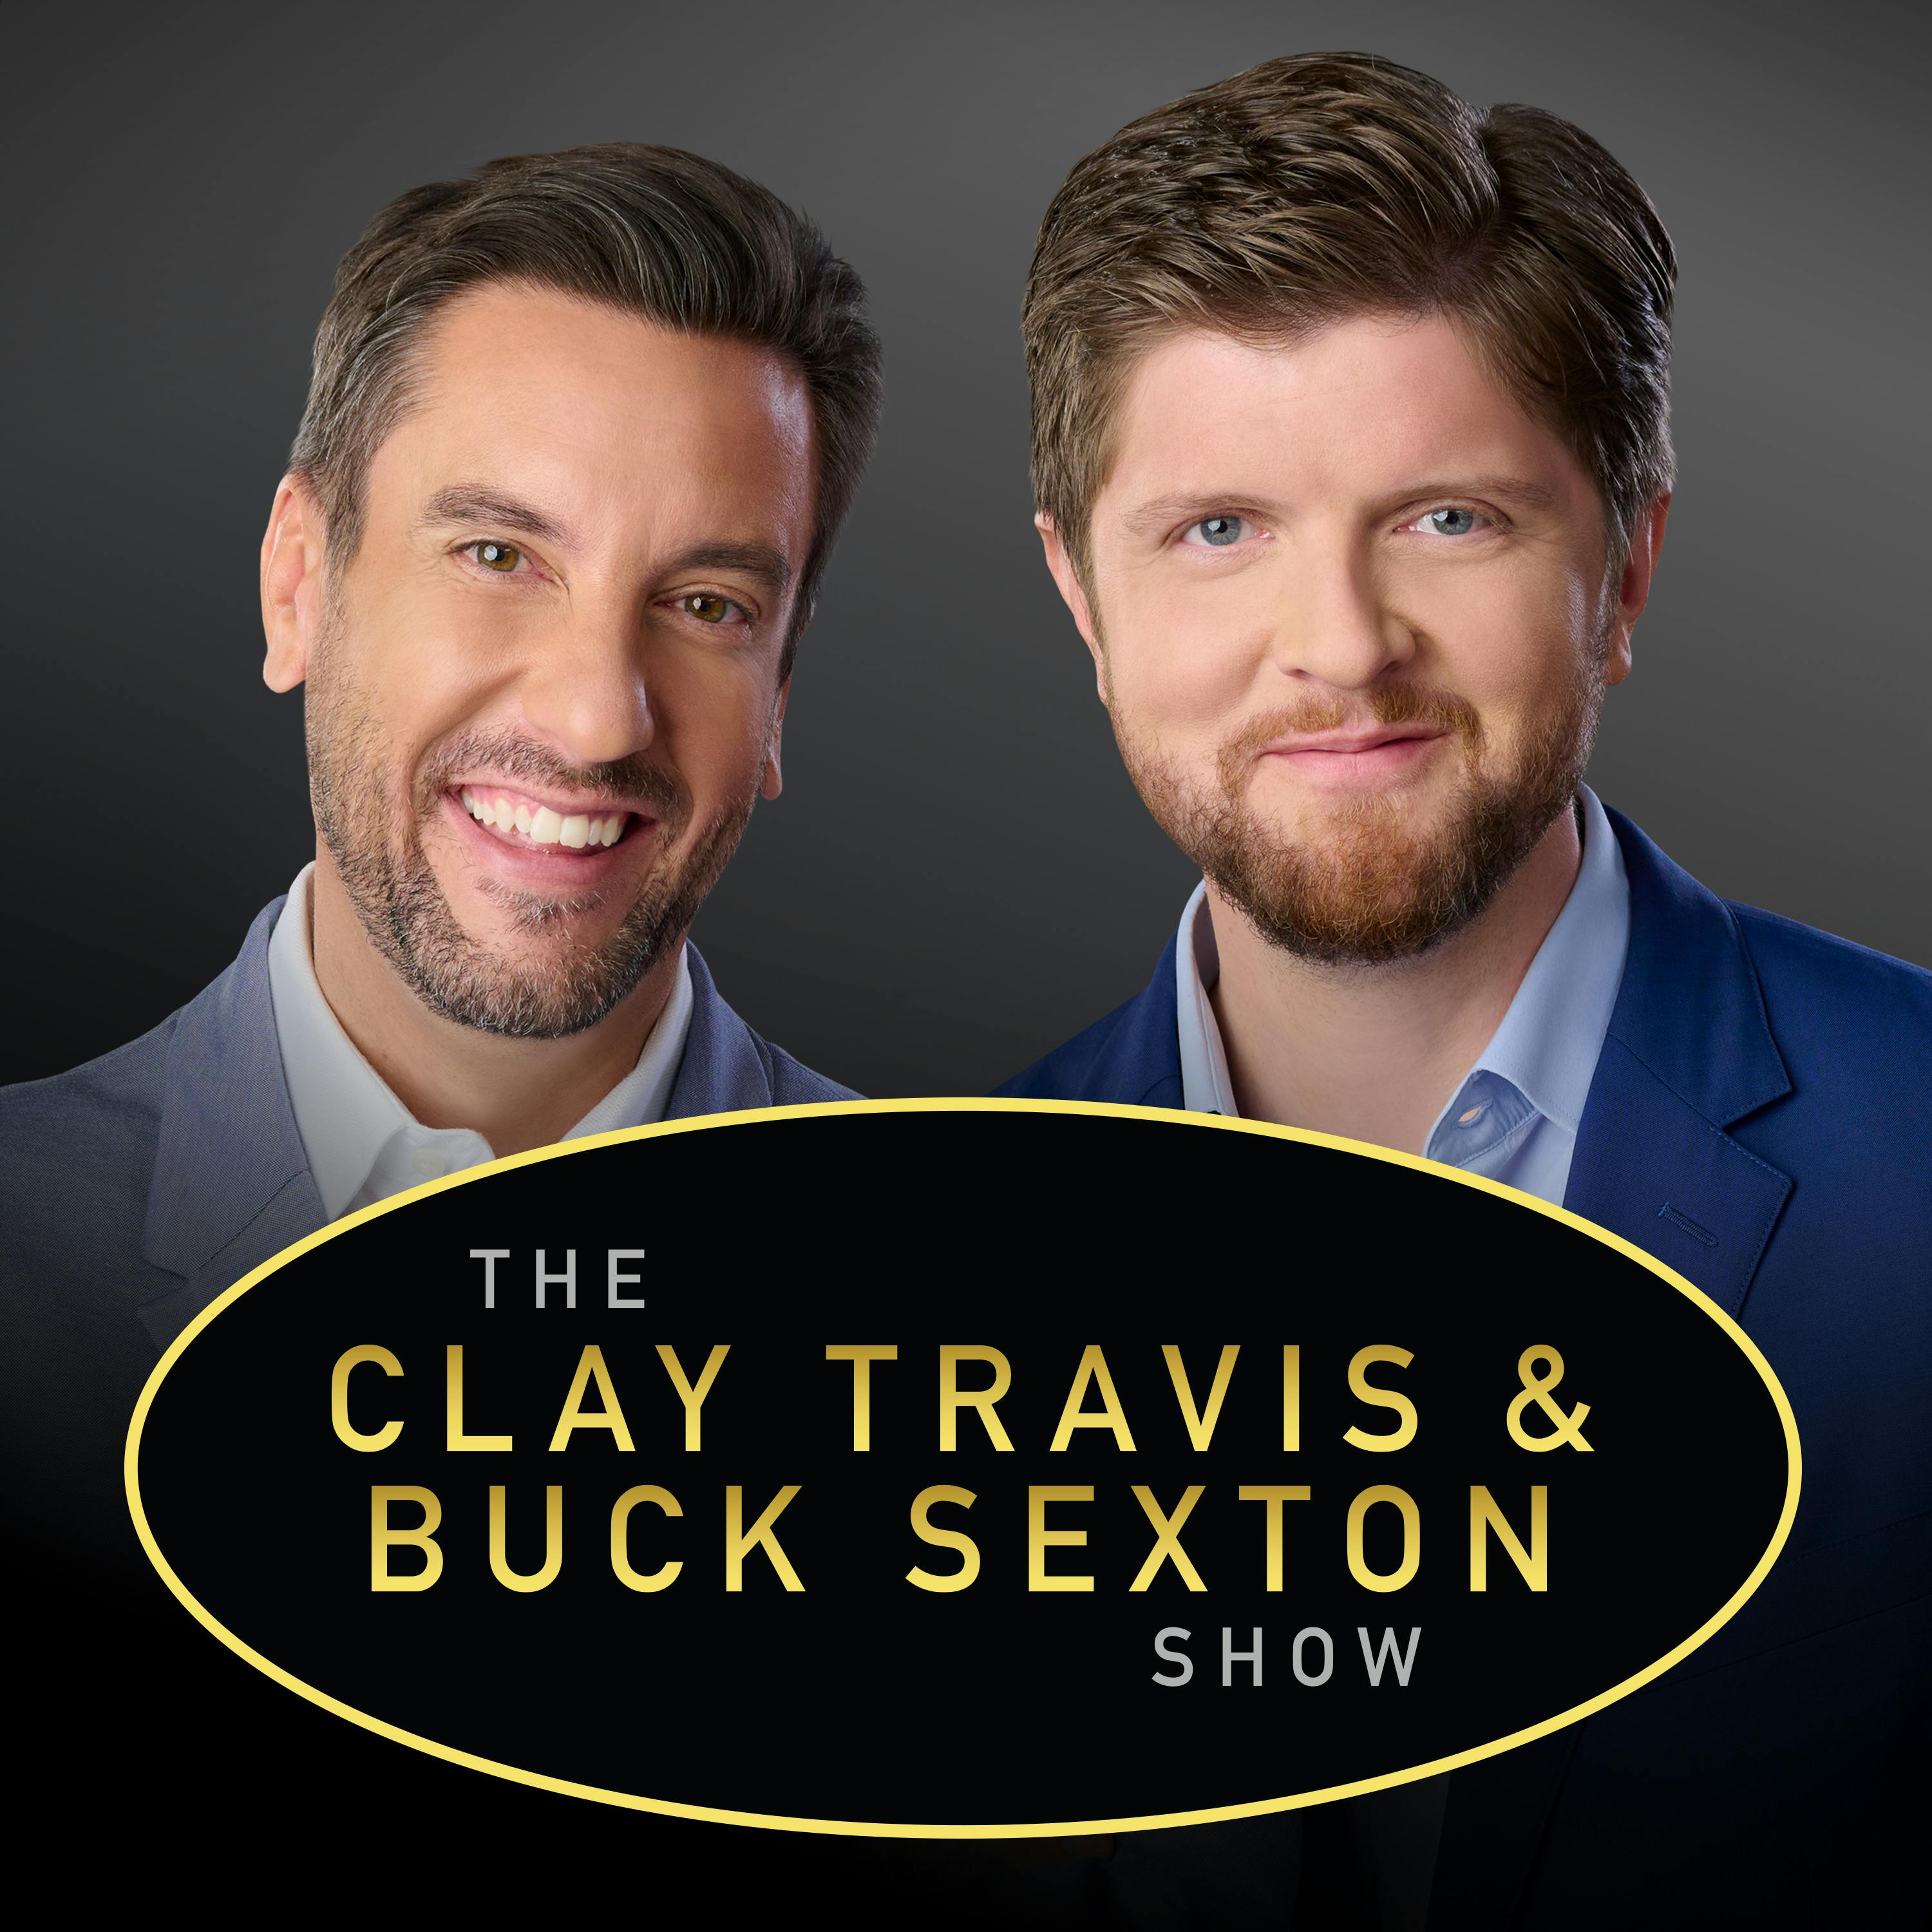 Clay Travis and Buck Sexton Show H2 – Jan 18 2022